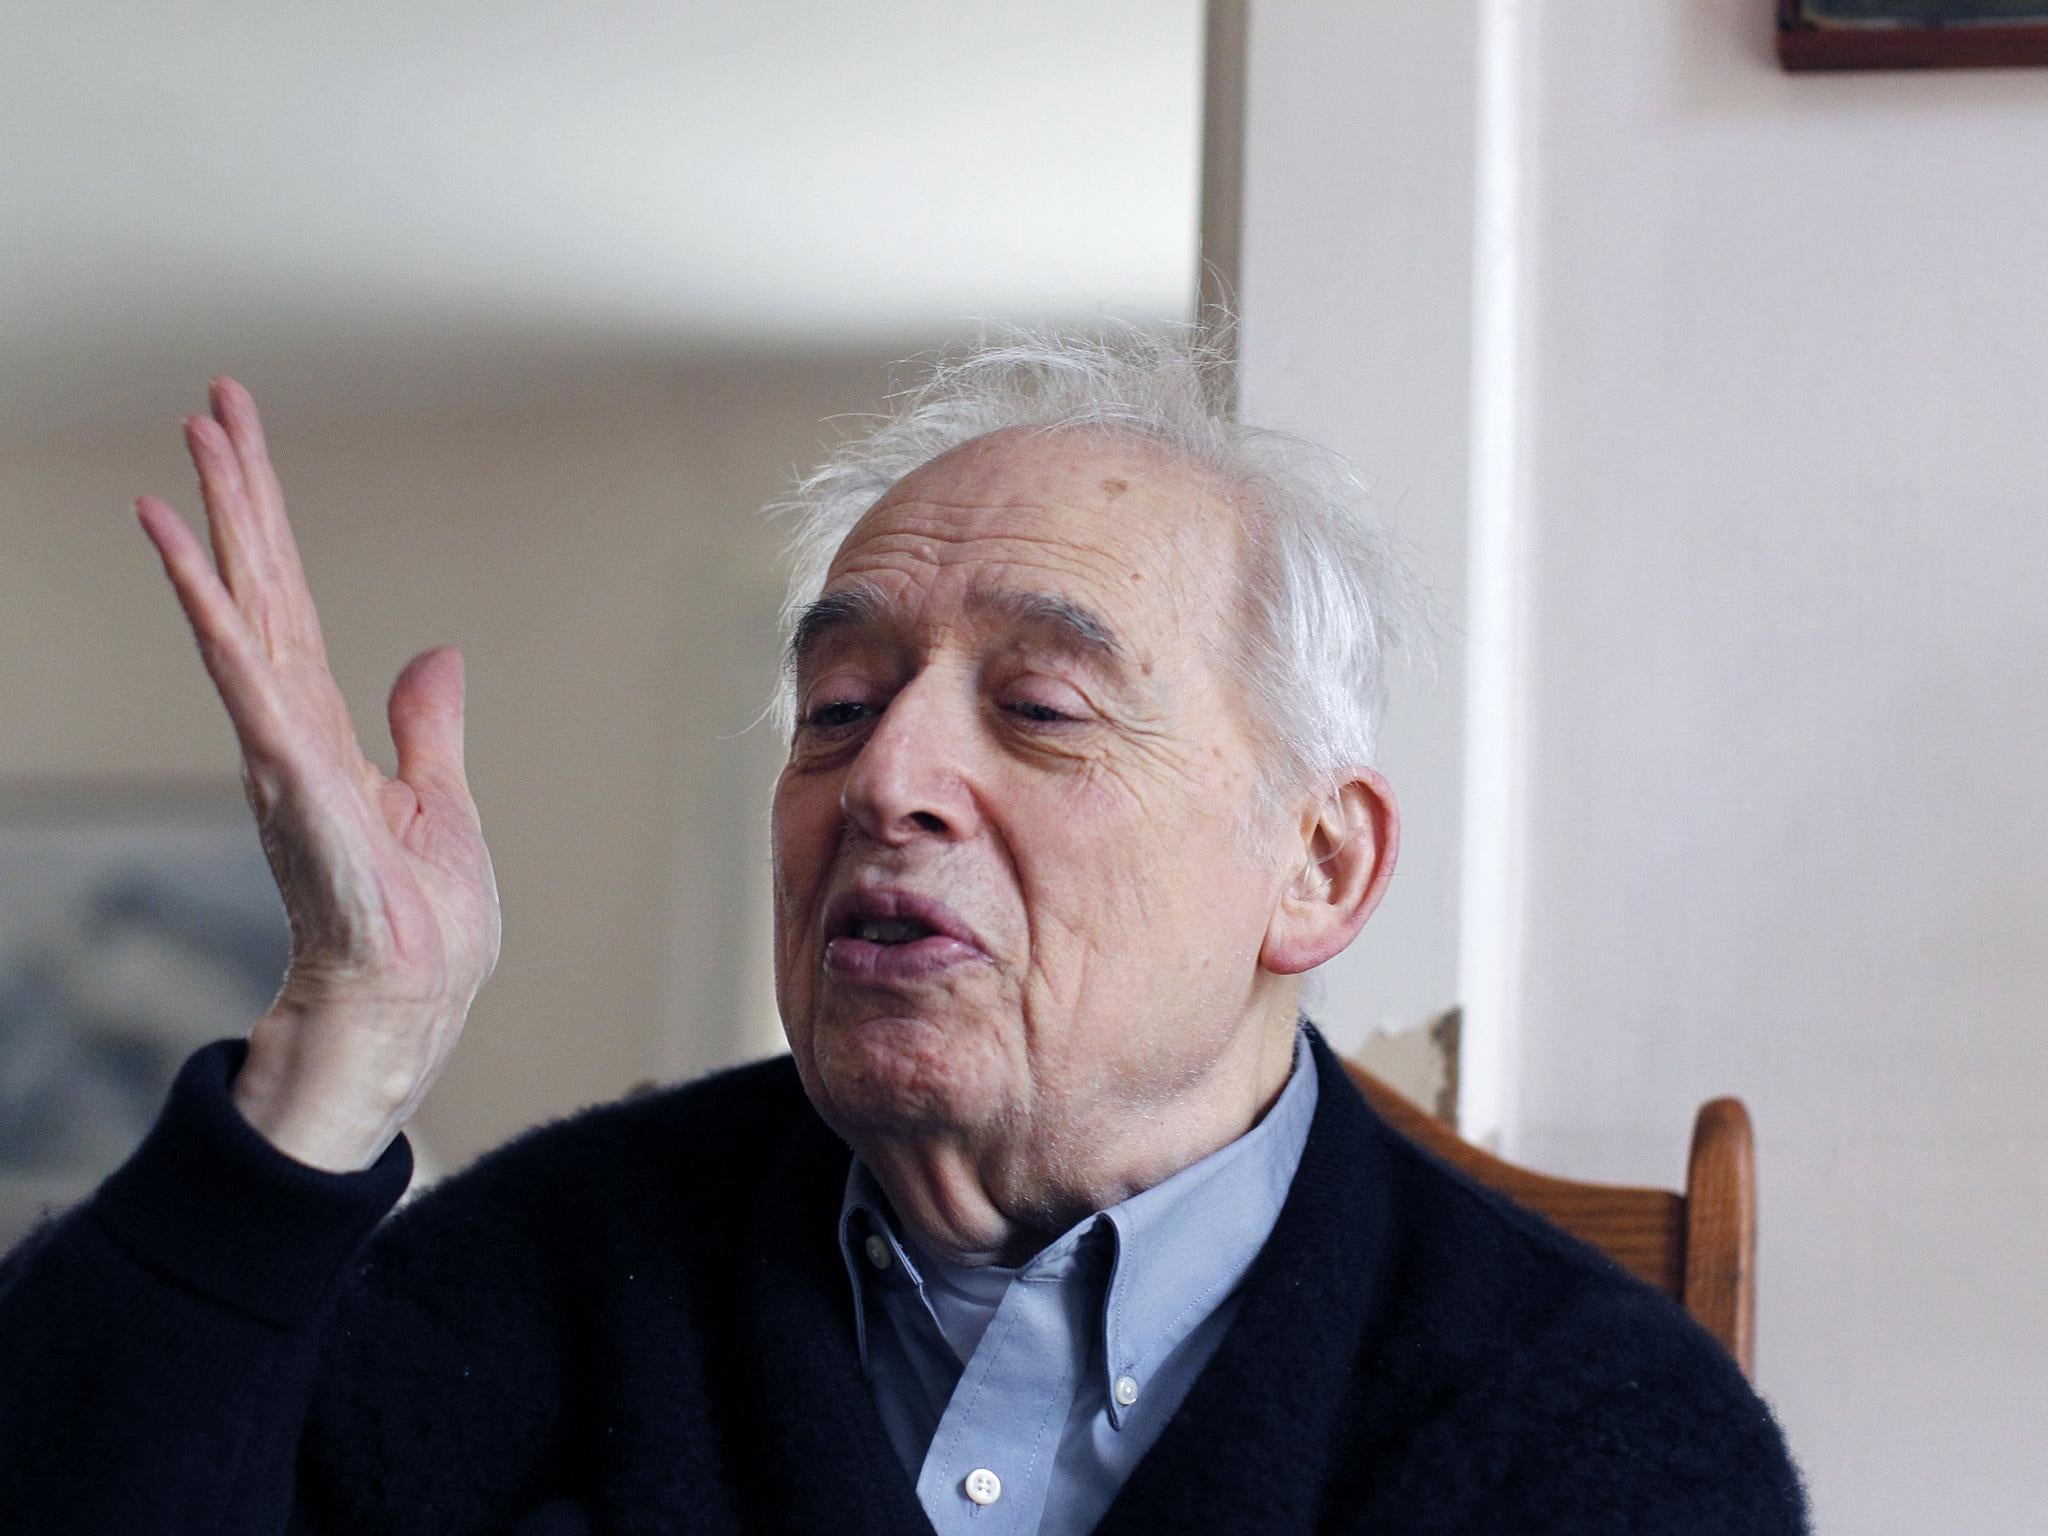 The immortal Harold Bloom, the greatest literary critic on the planet